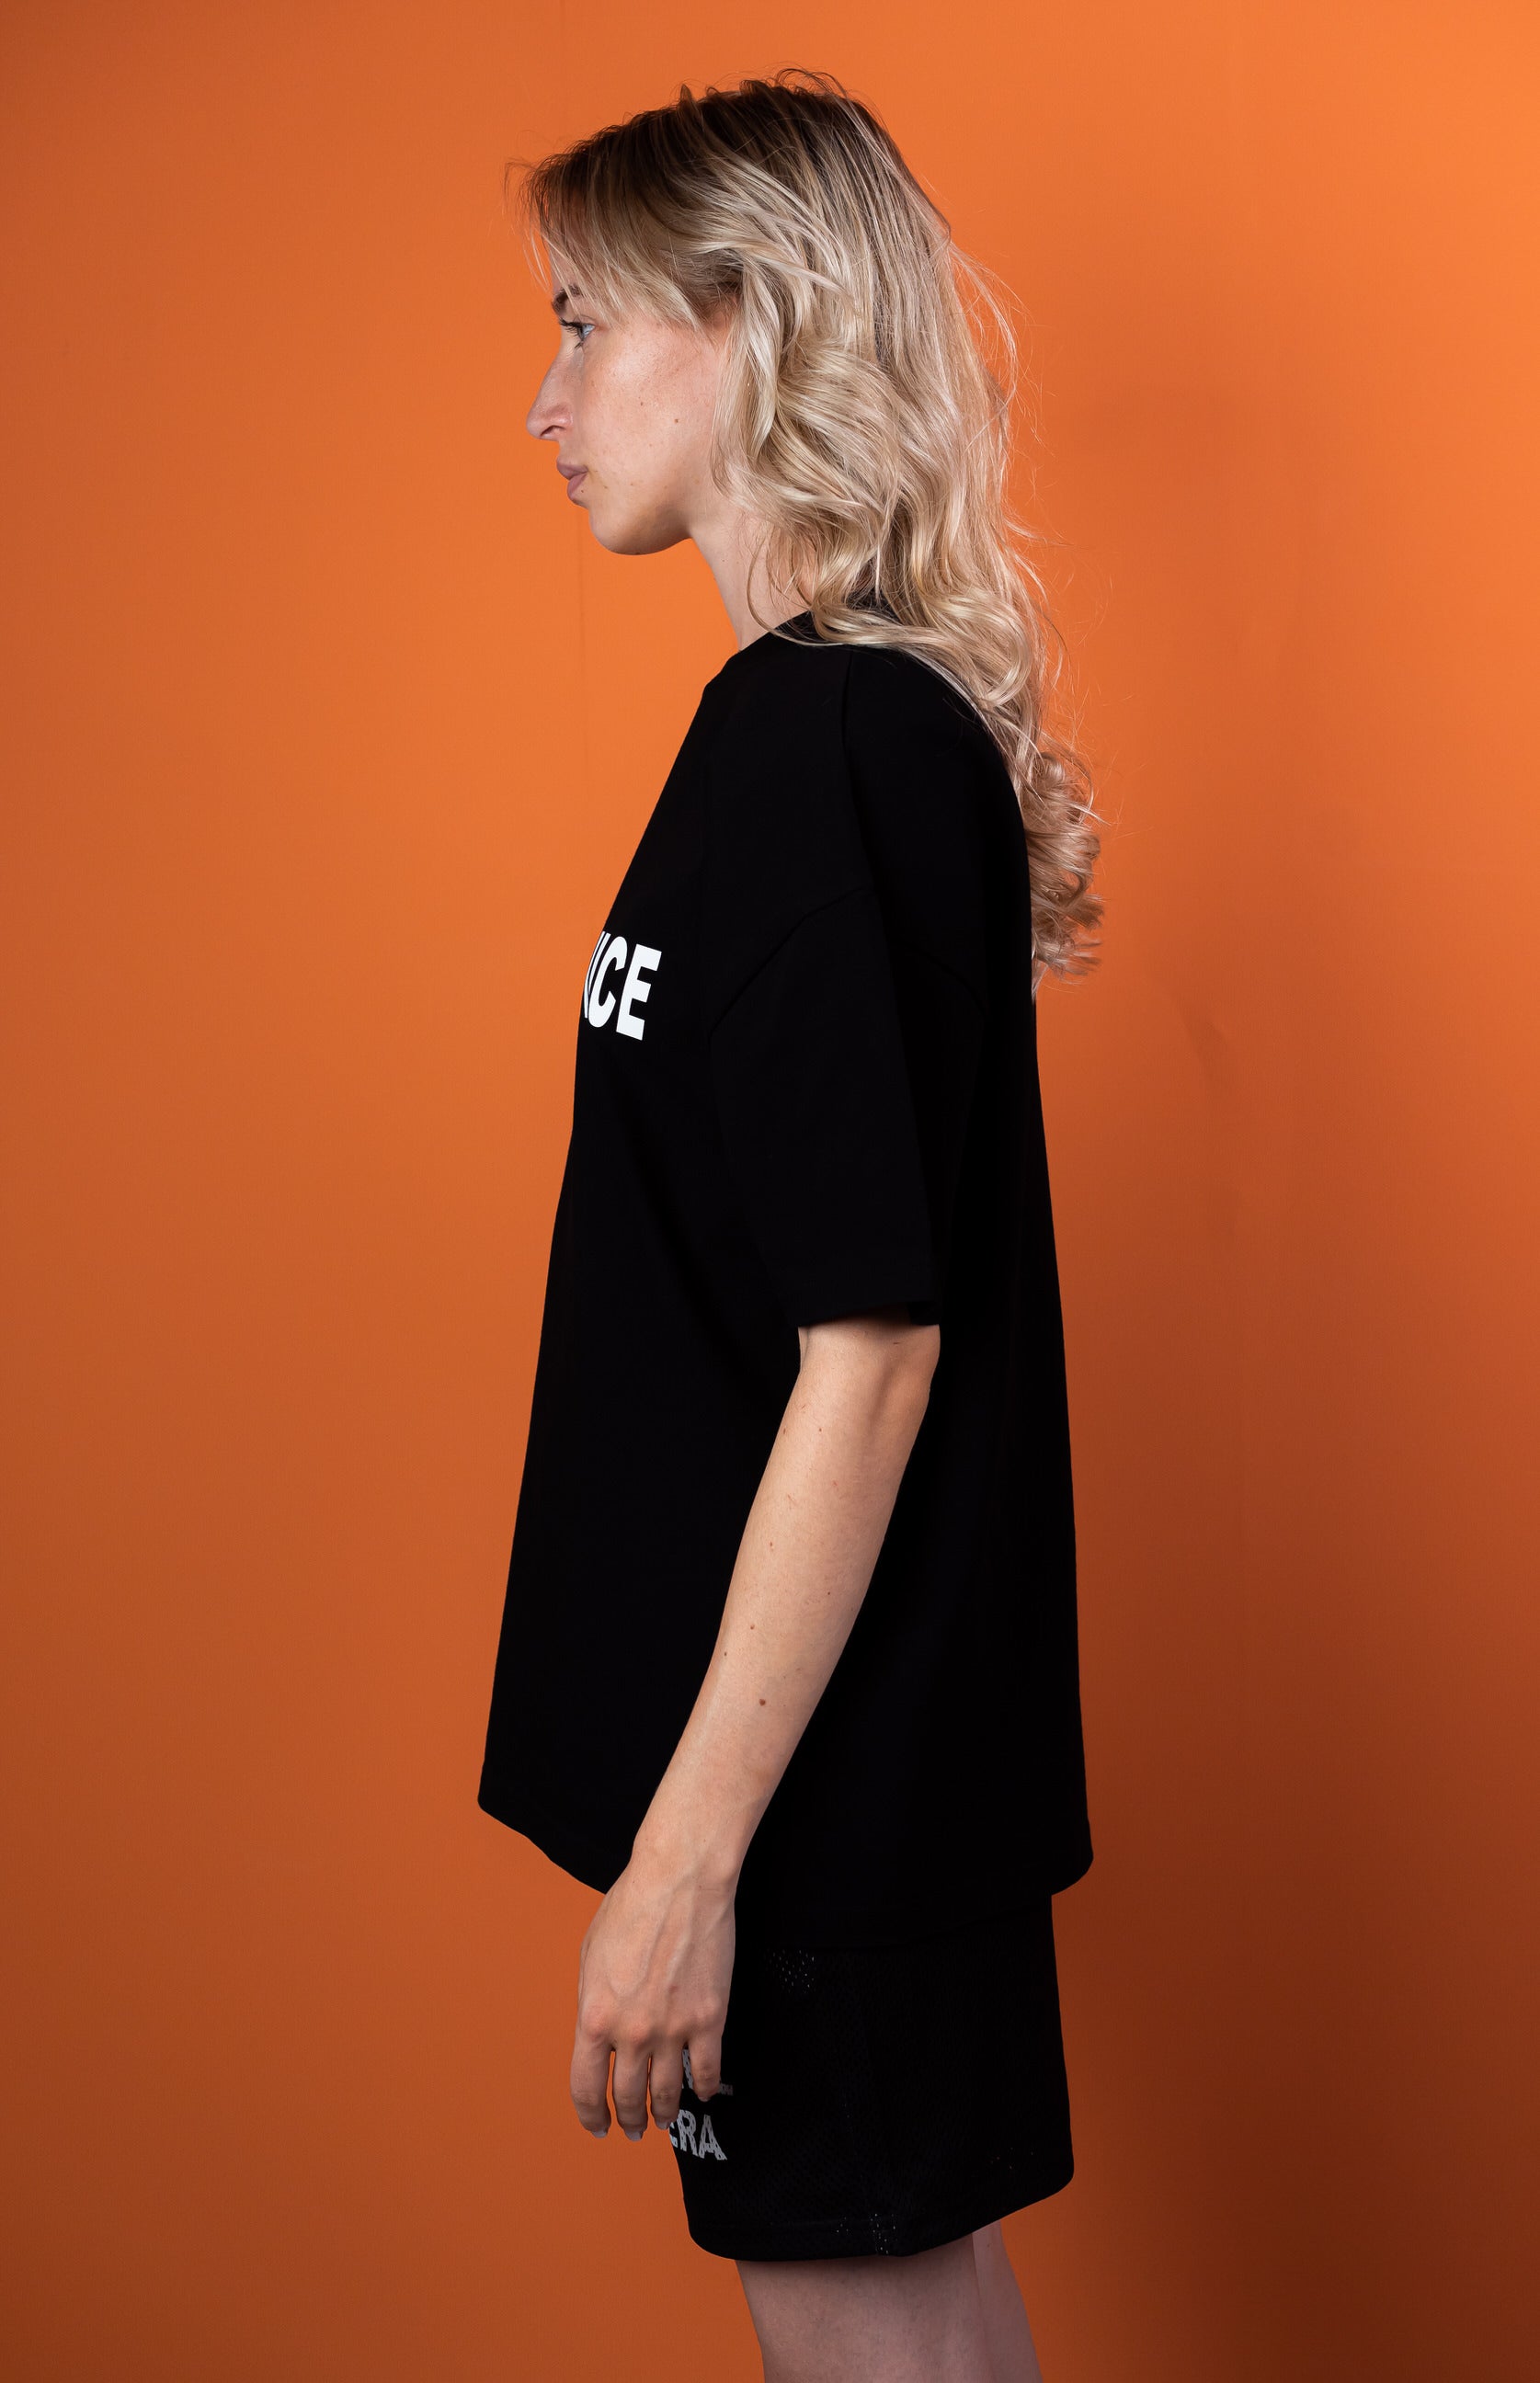 Female model wearing a Black oversize tshirt with white talk to me nice design on the front